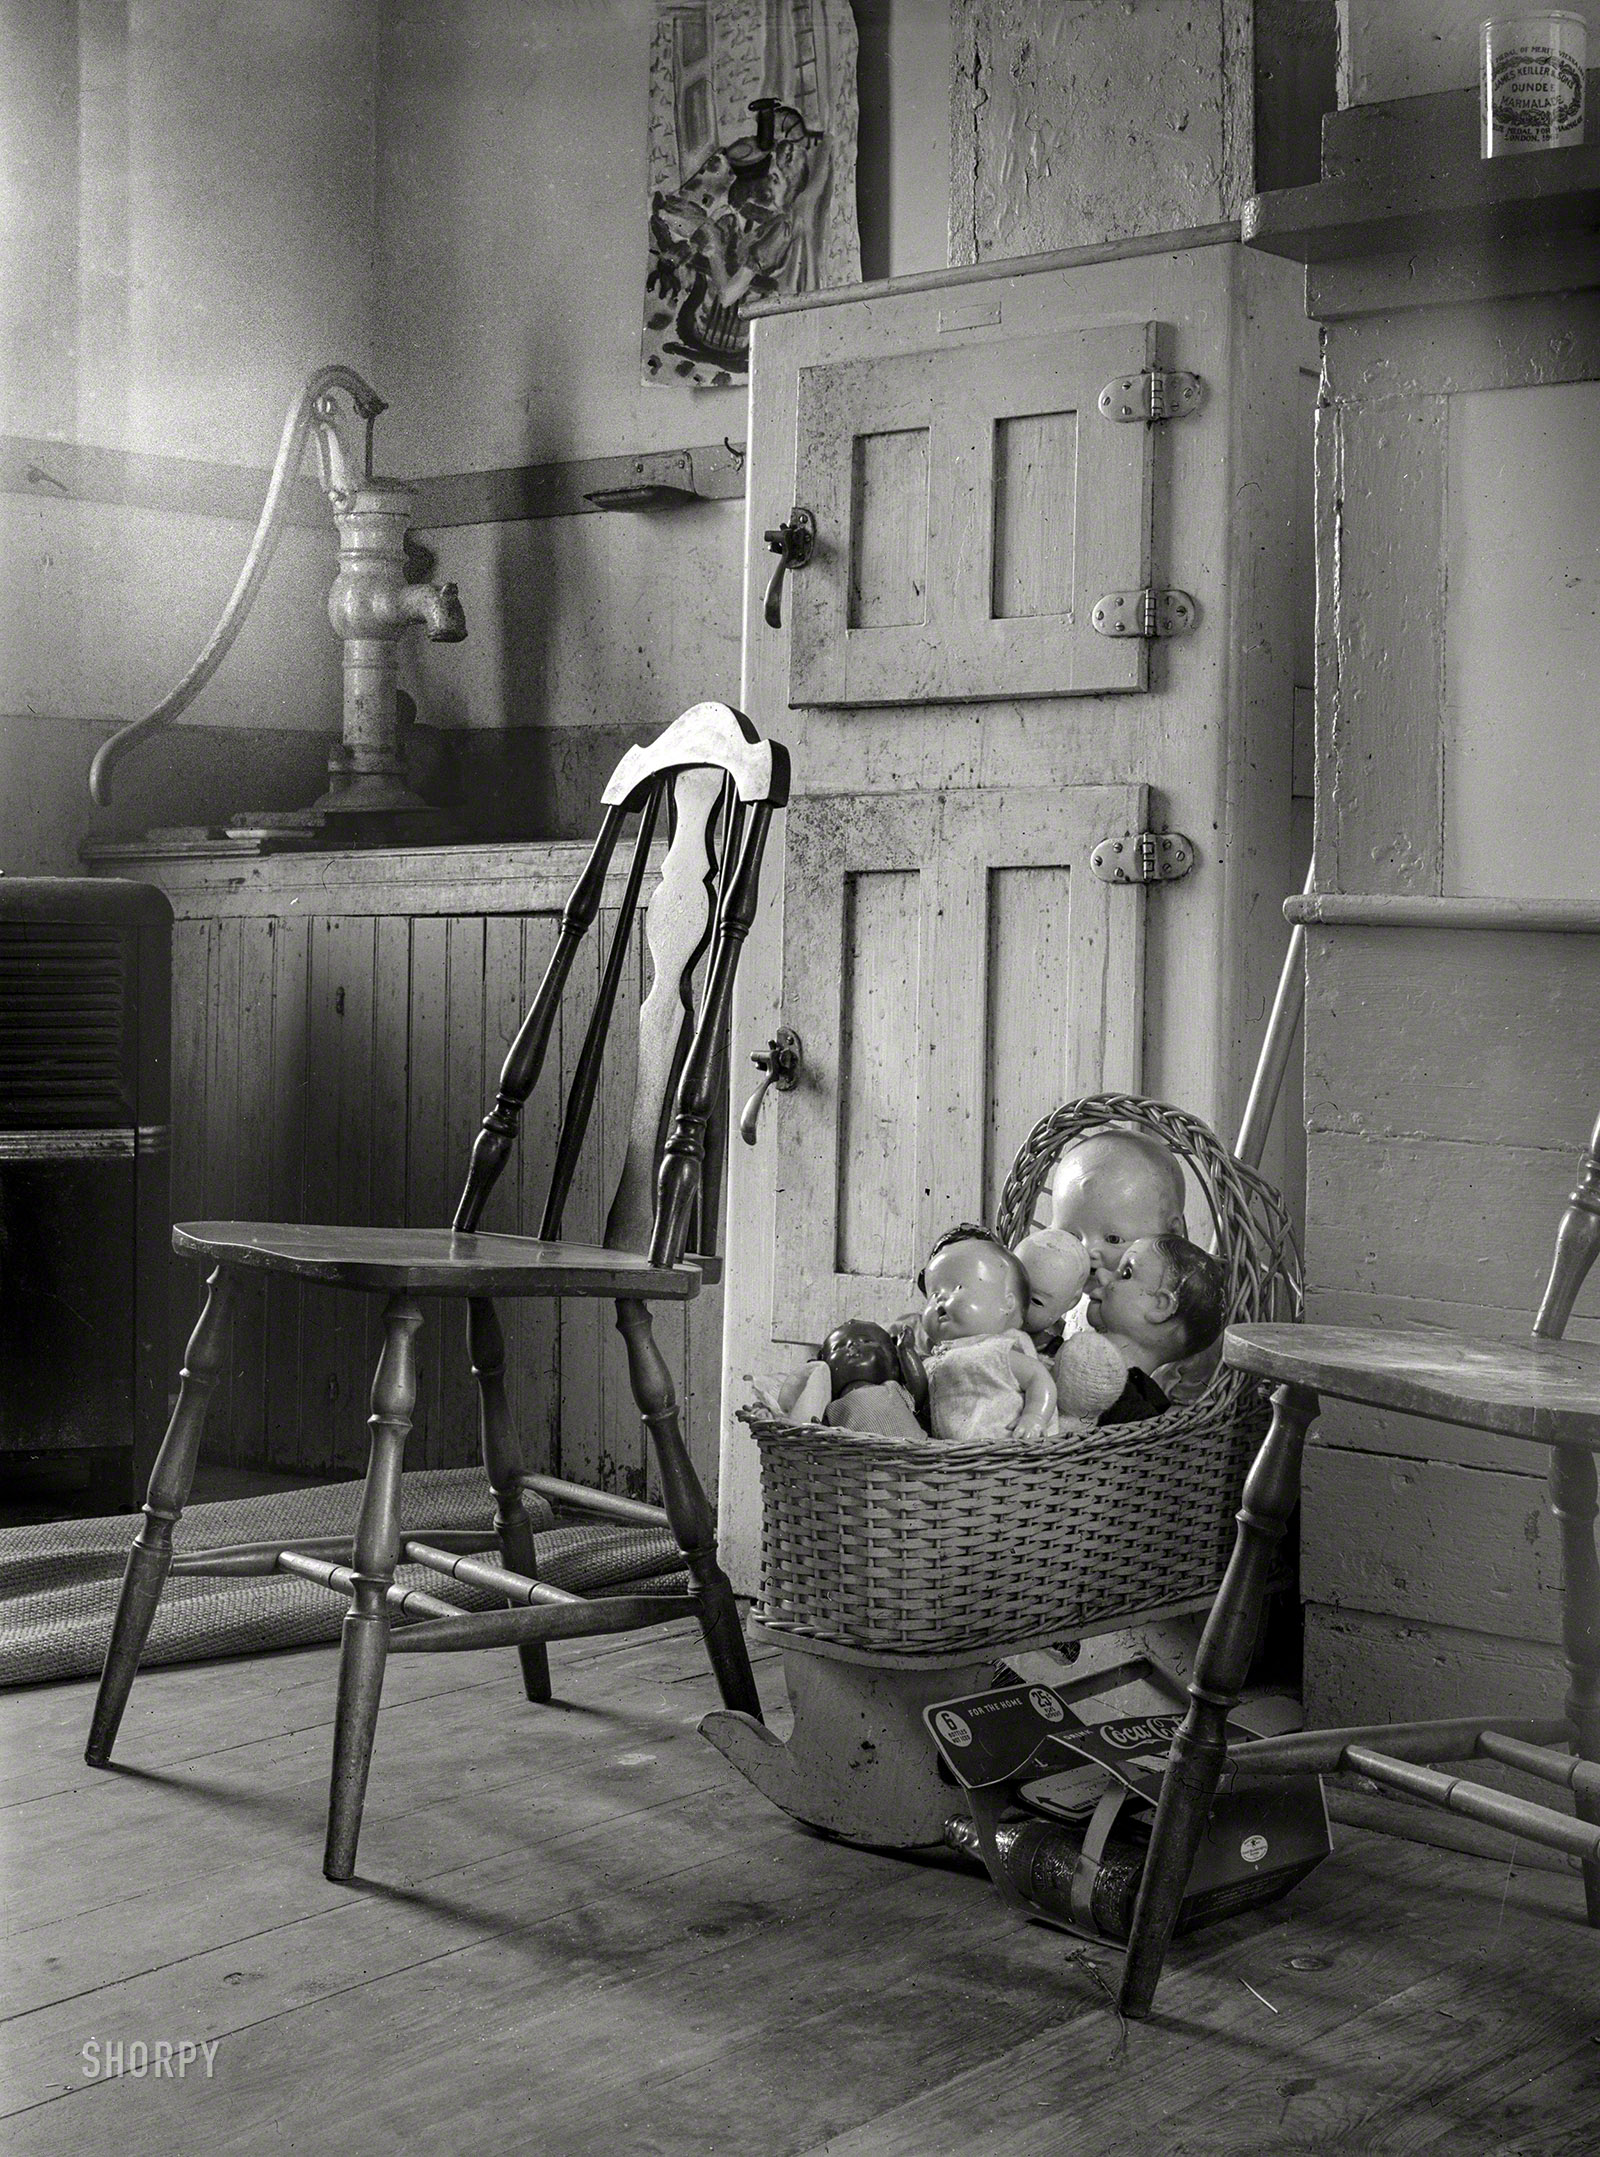 August 1940. "Dolls in crib next to icebox of kitchen in Provincetown, Massachusetts." Medium format negative by Edwin Rosskam. View full size.